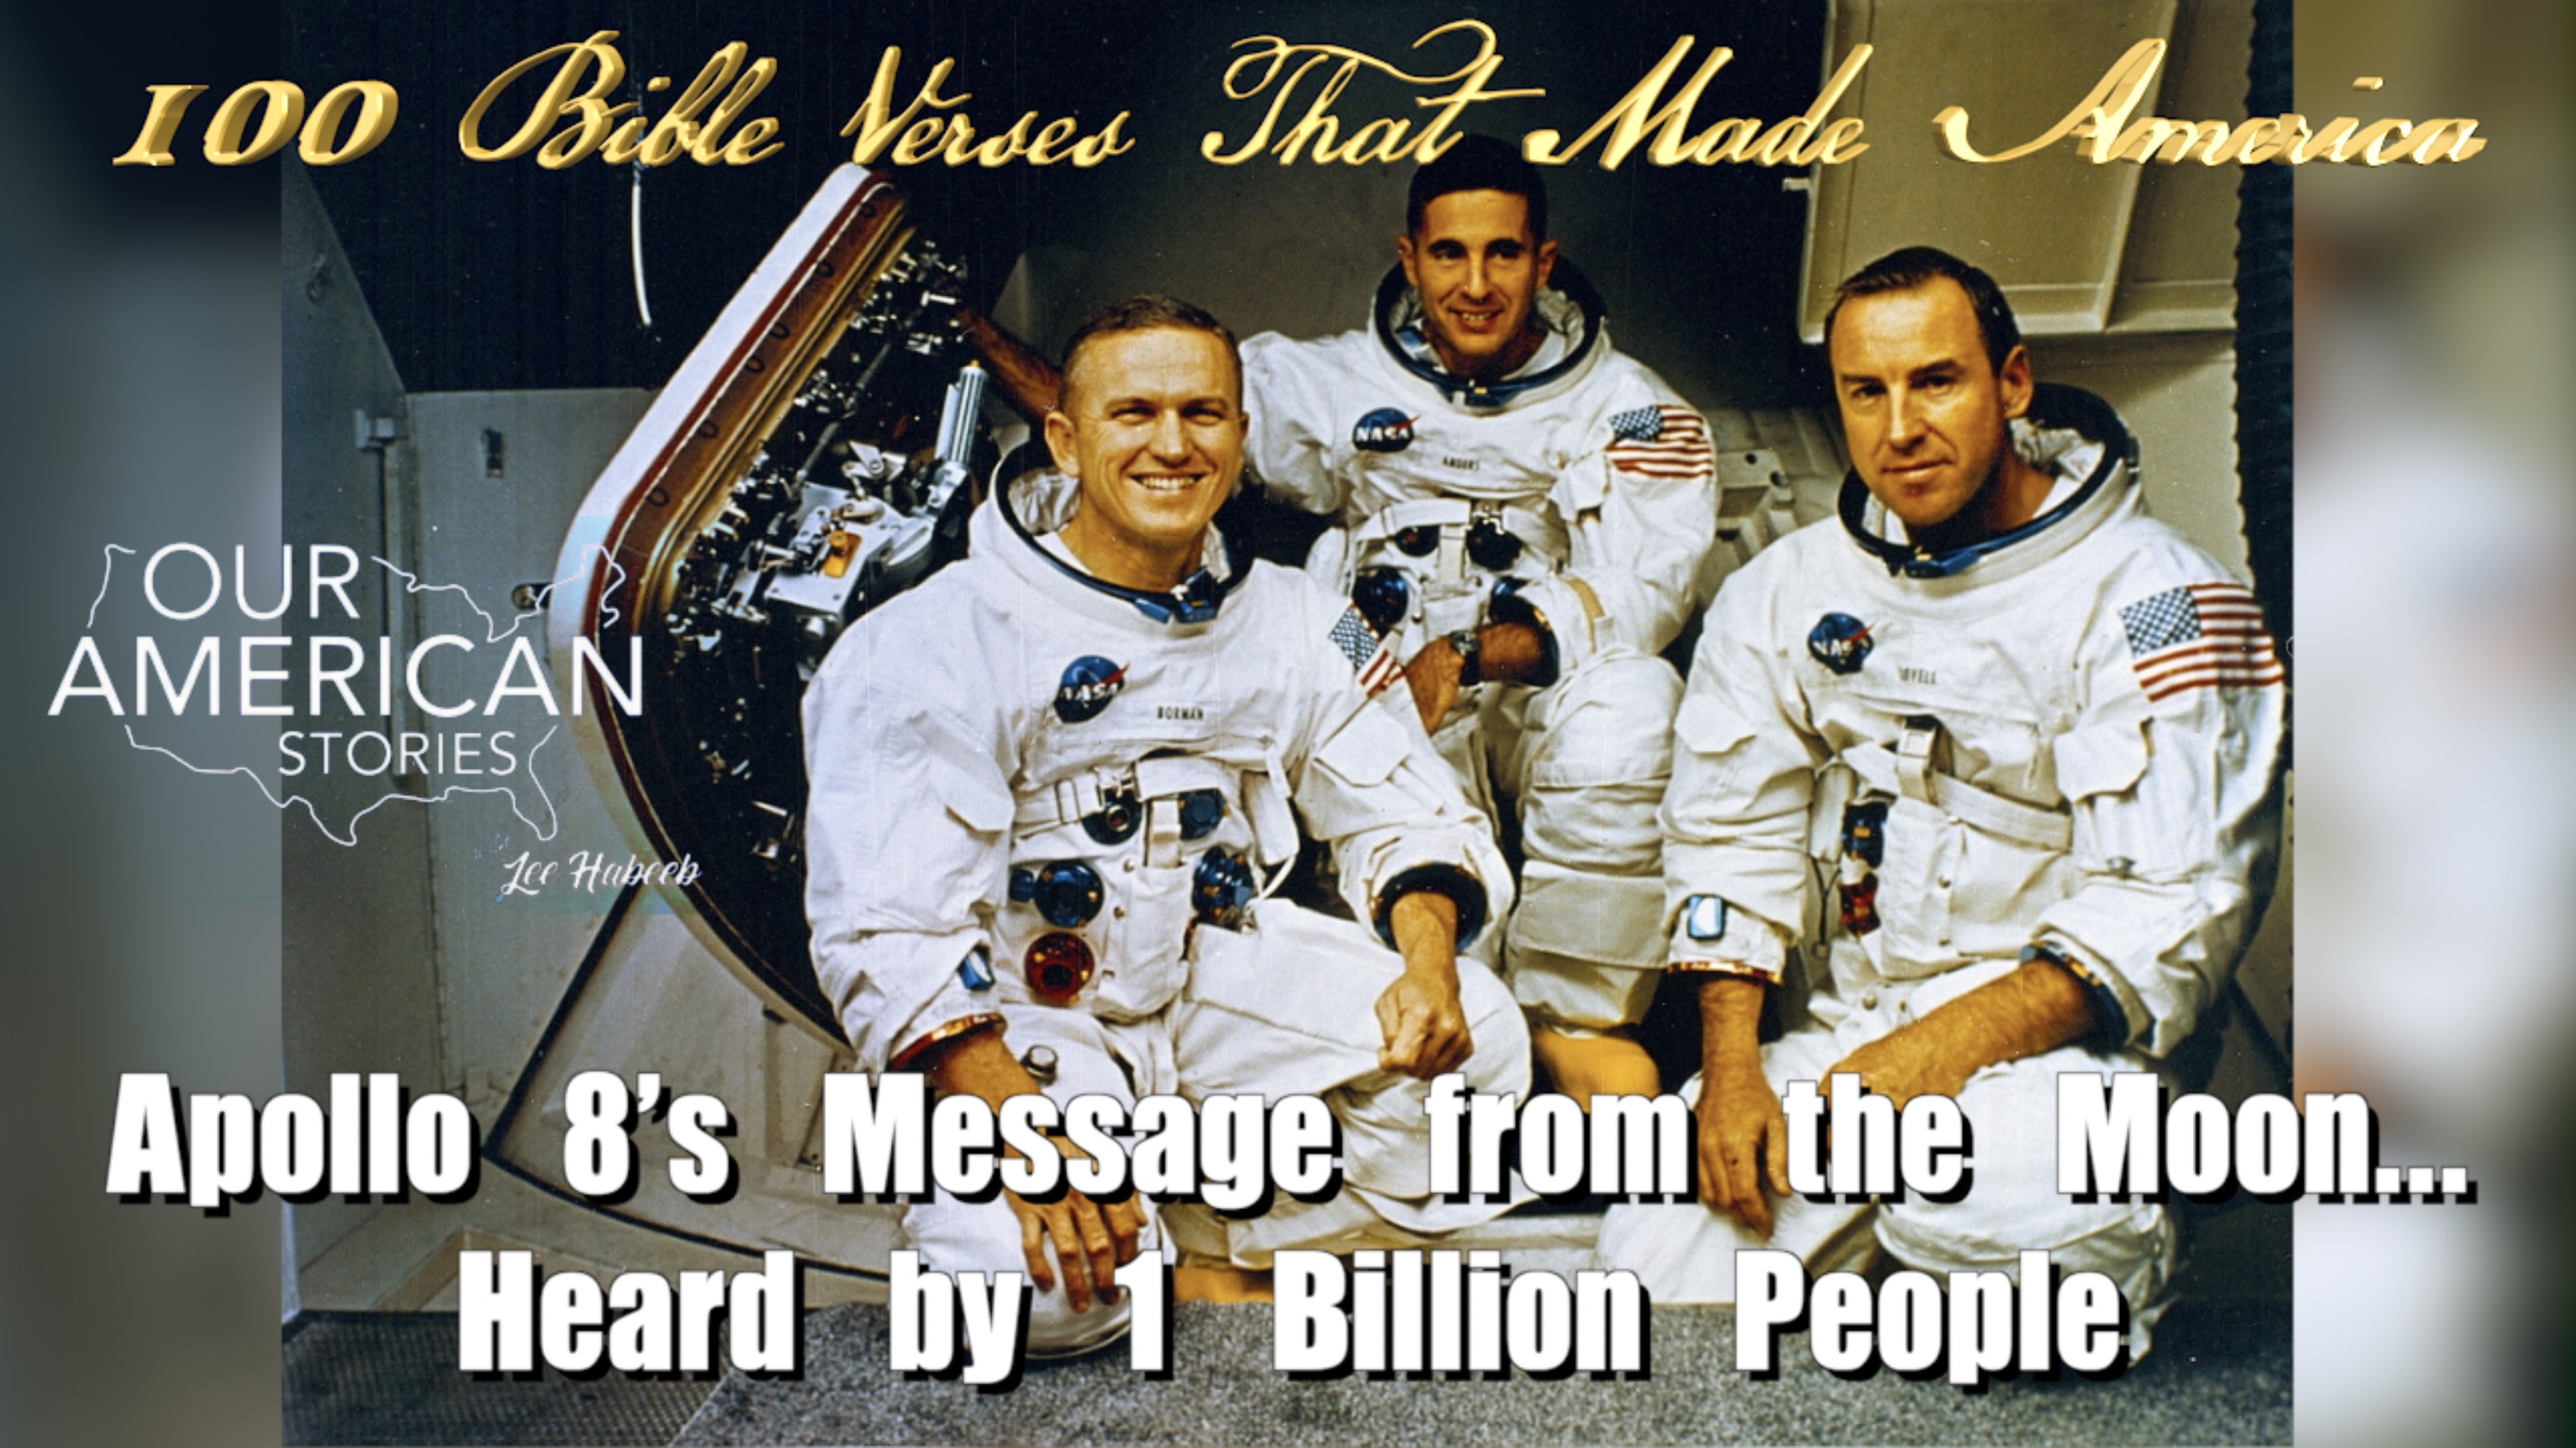 The Apollo 8 Crew’s Message from the Moon... Heard by 1 Billion People